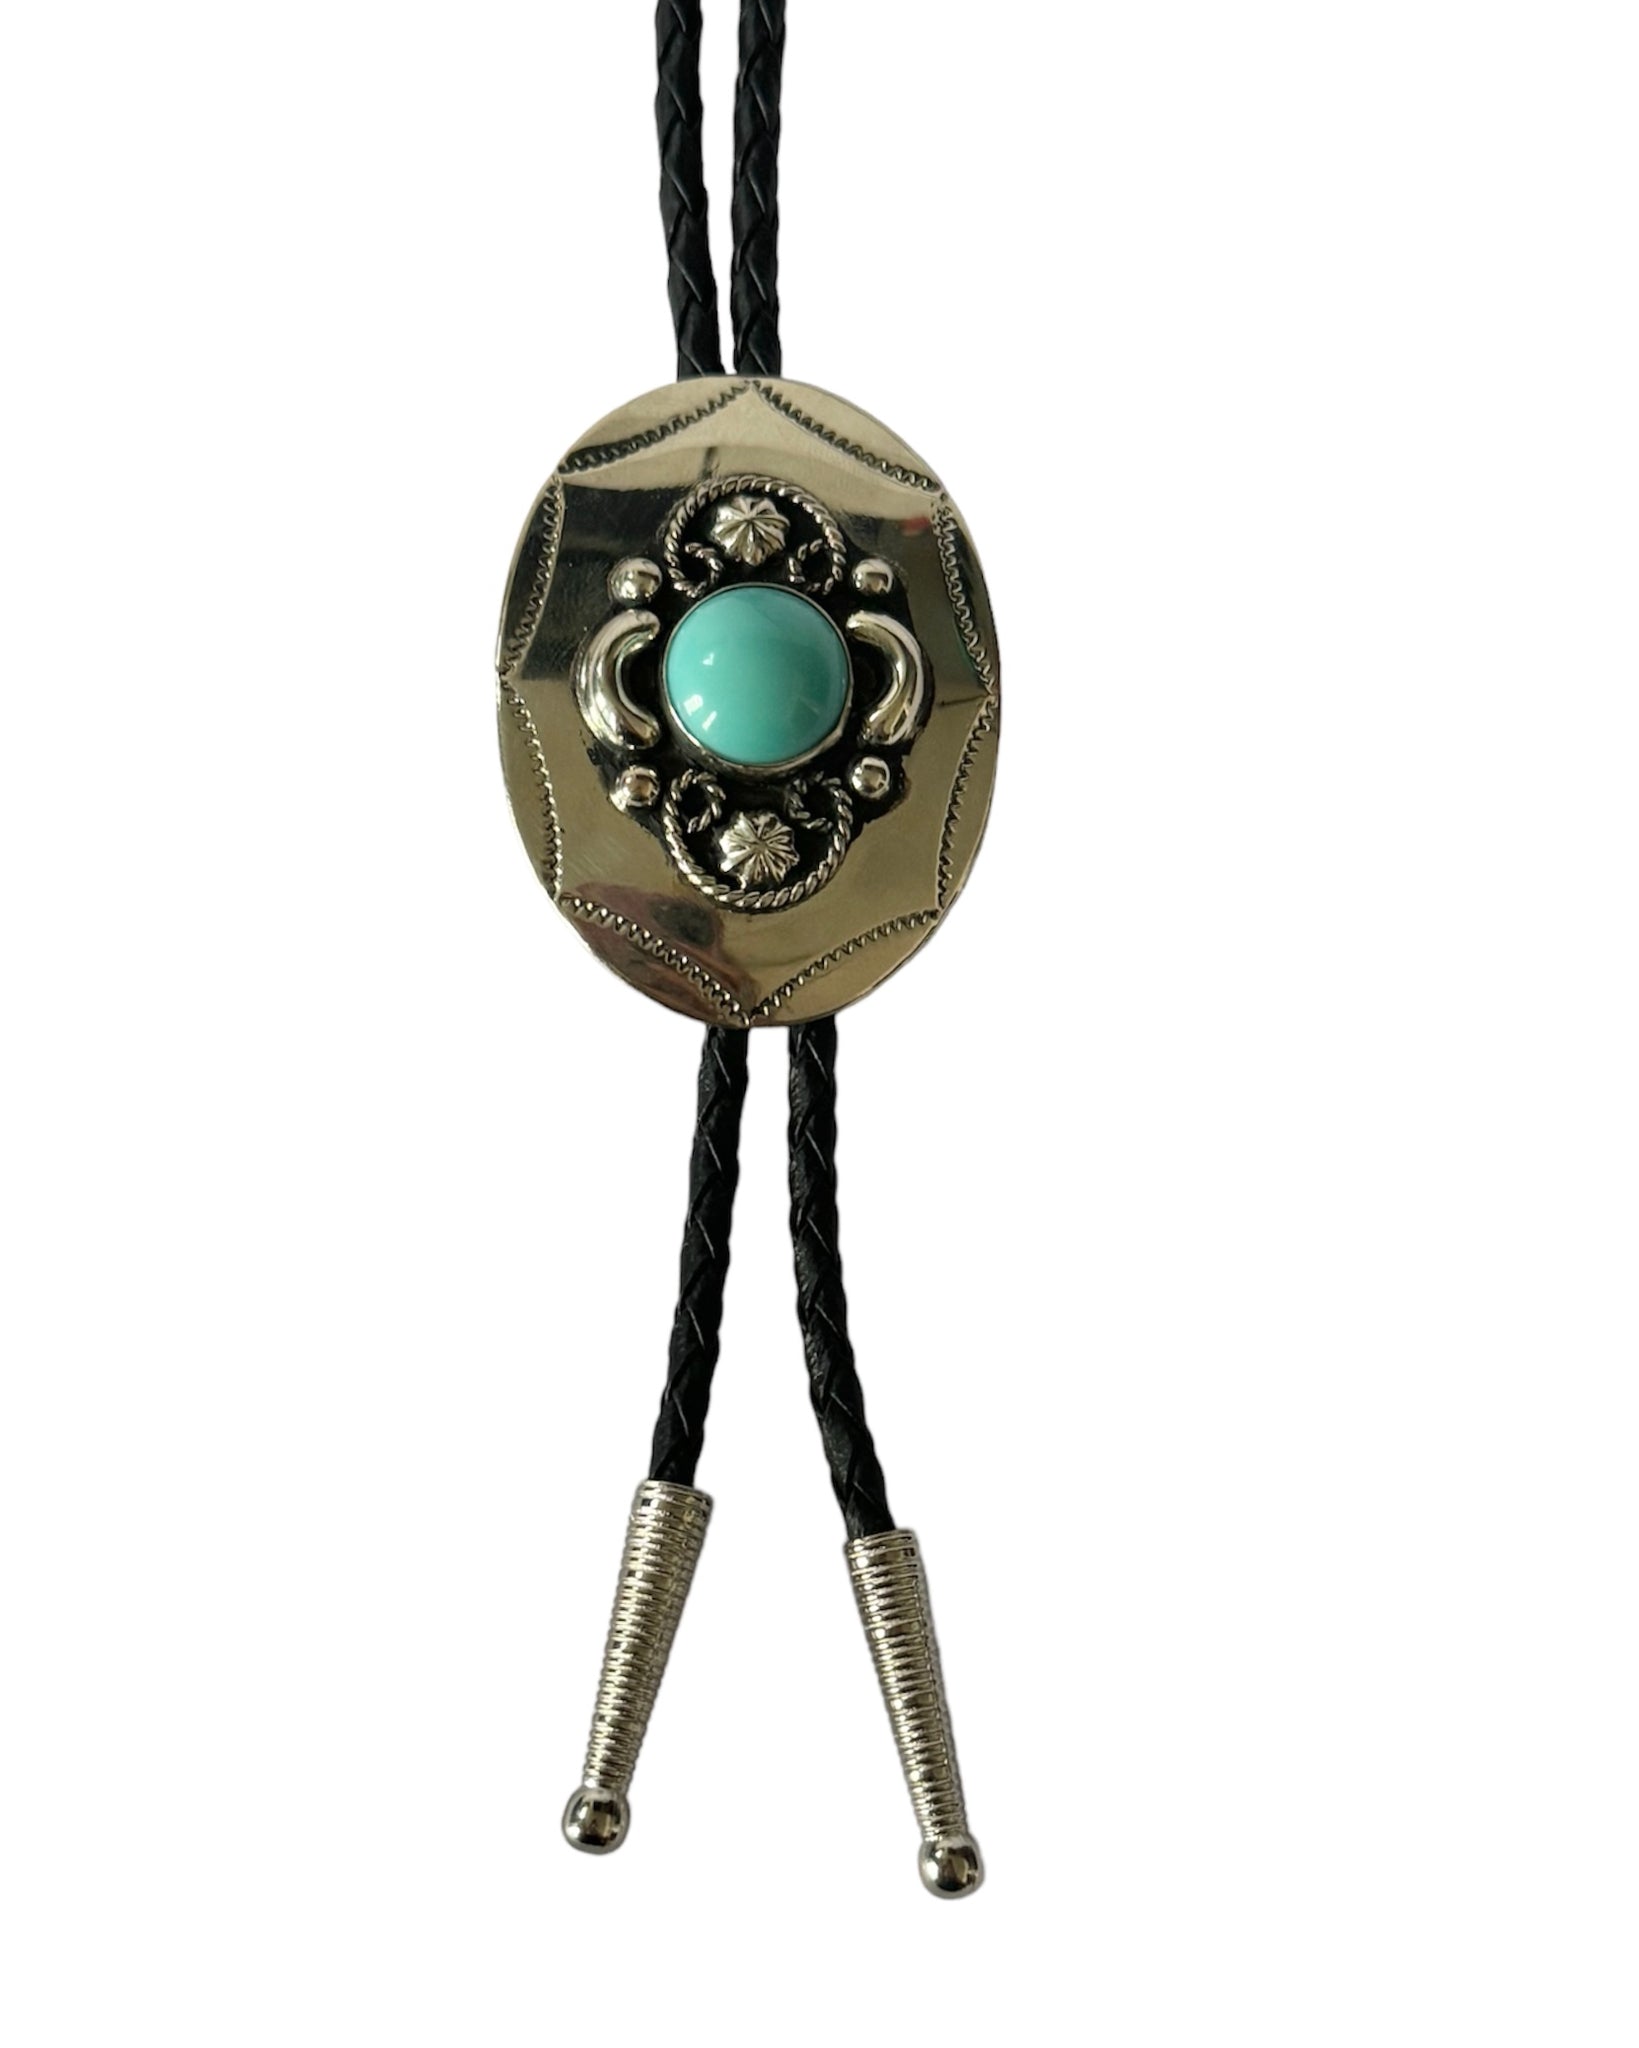 Bolo Tie - German Silver Bolo with Turquoise Stone